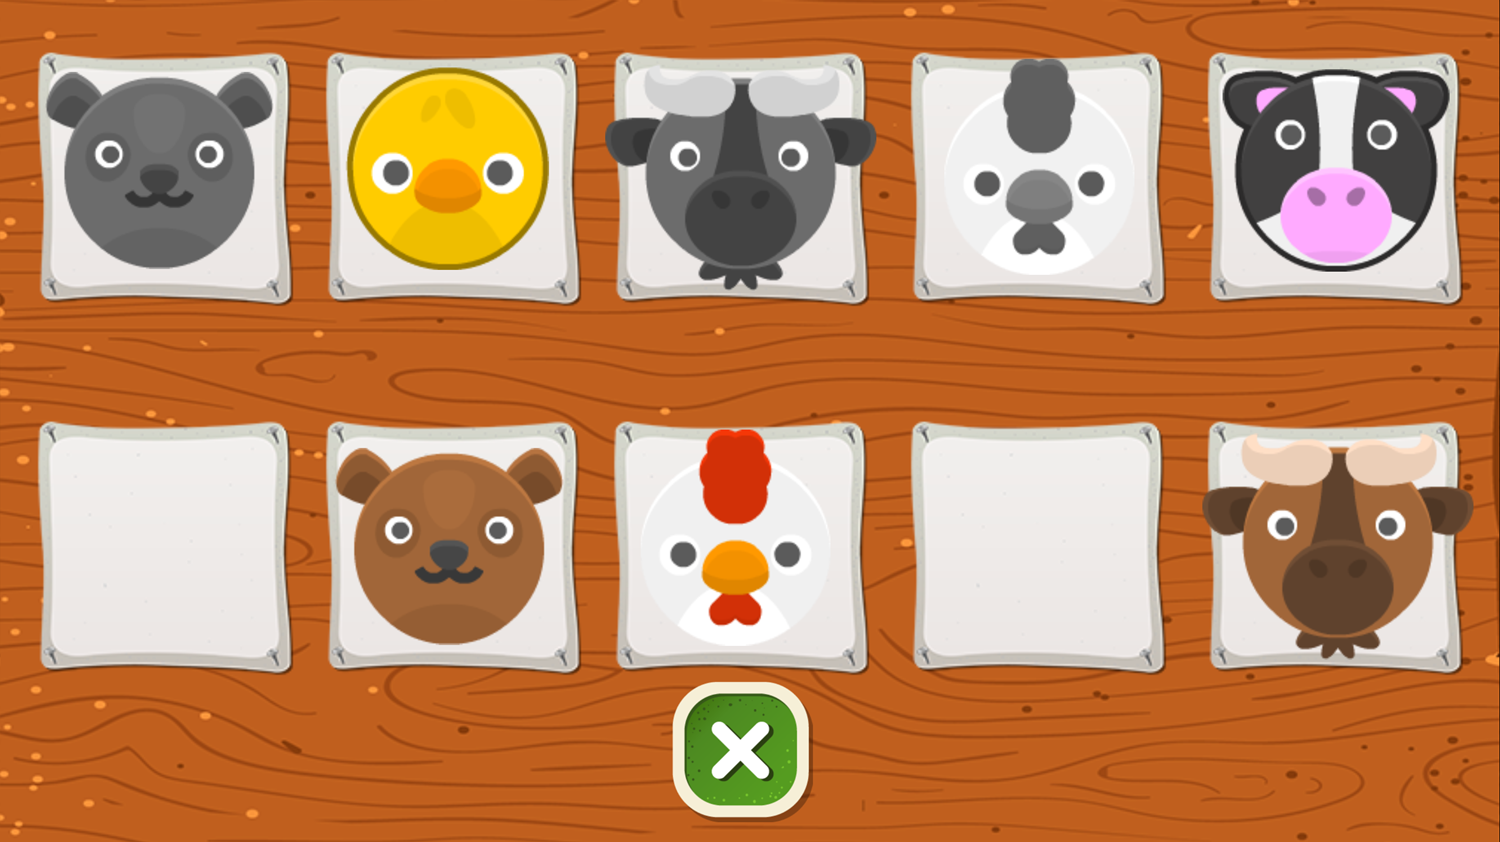 Zoo Drag & Drop Game for Kids: Game Where Children Can Match Animal Tiles